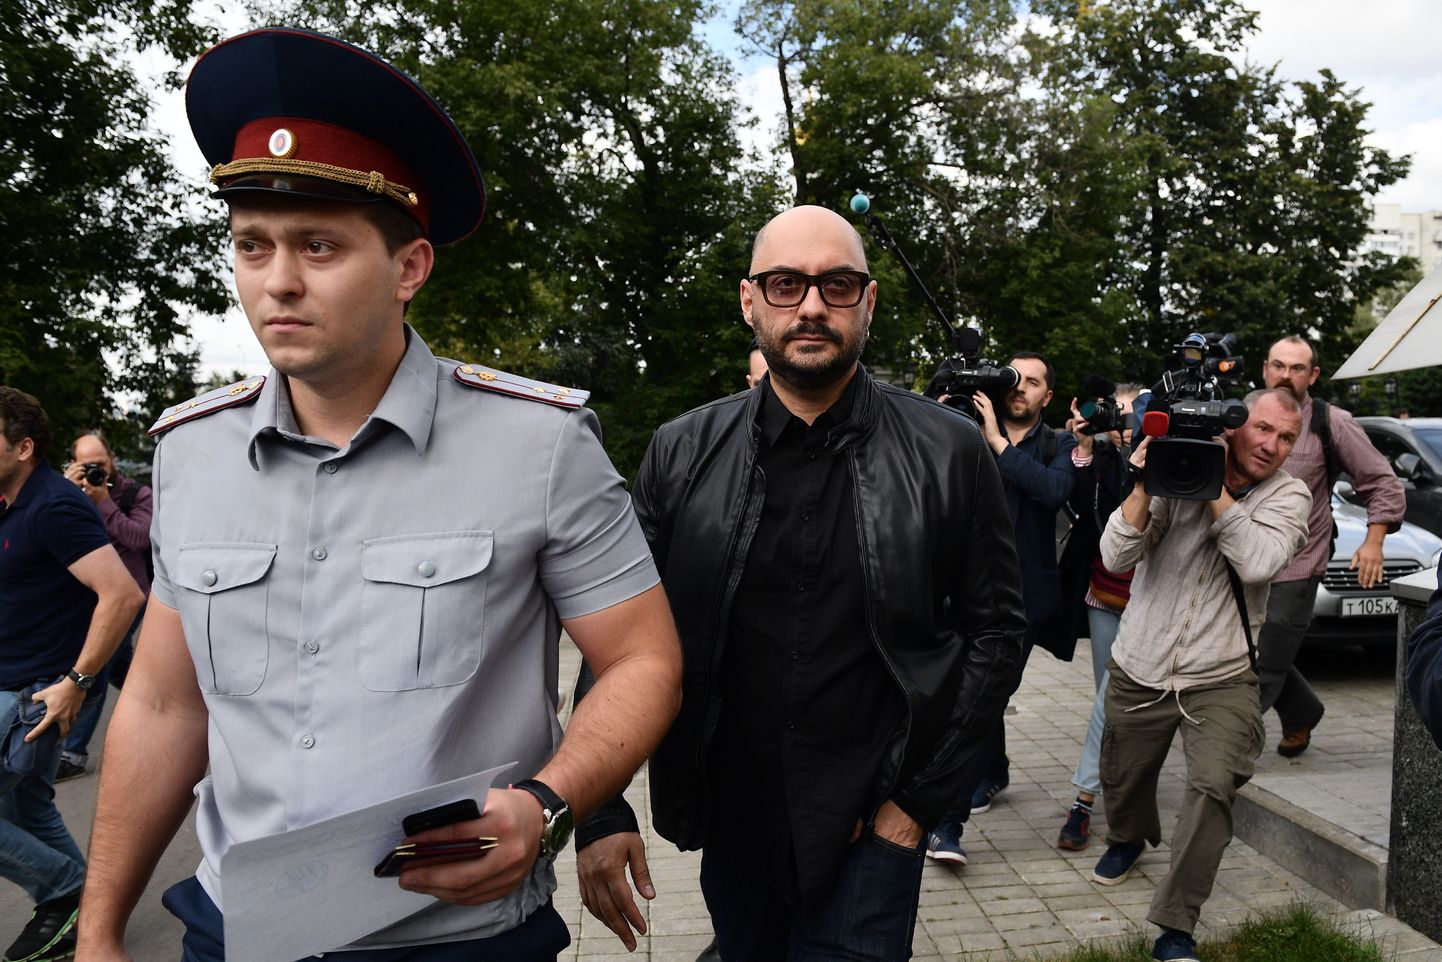 3184289 09/04/2017 Theater and film director Kirill Serebrennikov, center, charged with embezzlement, after a hearing at the Moscow City Court, which considered an appeal filed by Serebrennikov's lawyer against the director's house arrest. The court left Gogol Center artistic director Serebrennikov under house arrest. Ramil Sitdikov/Sputnik